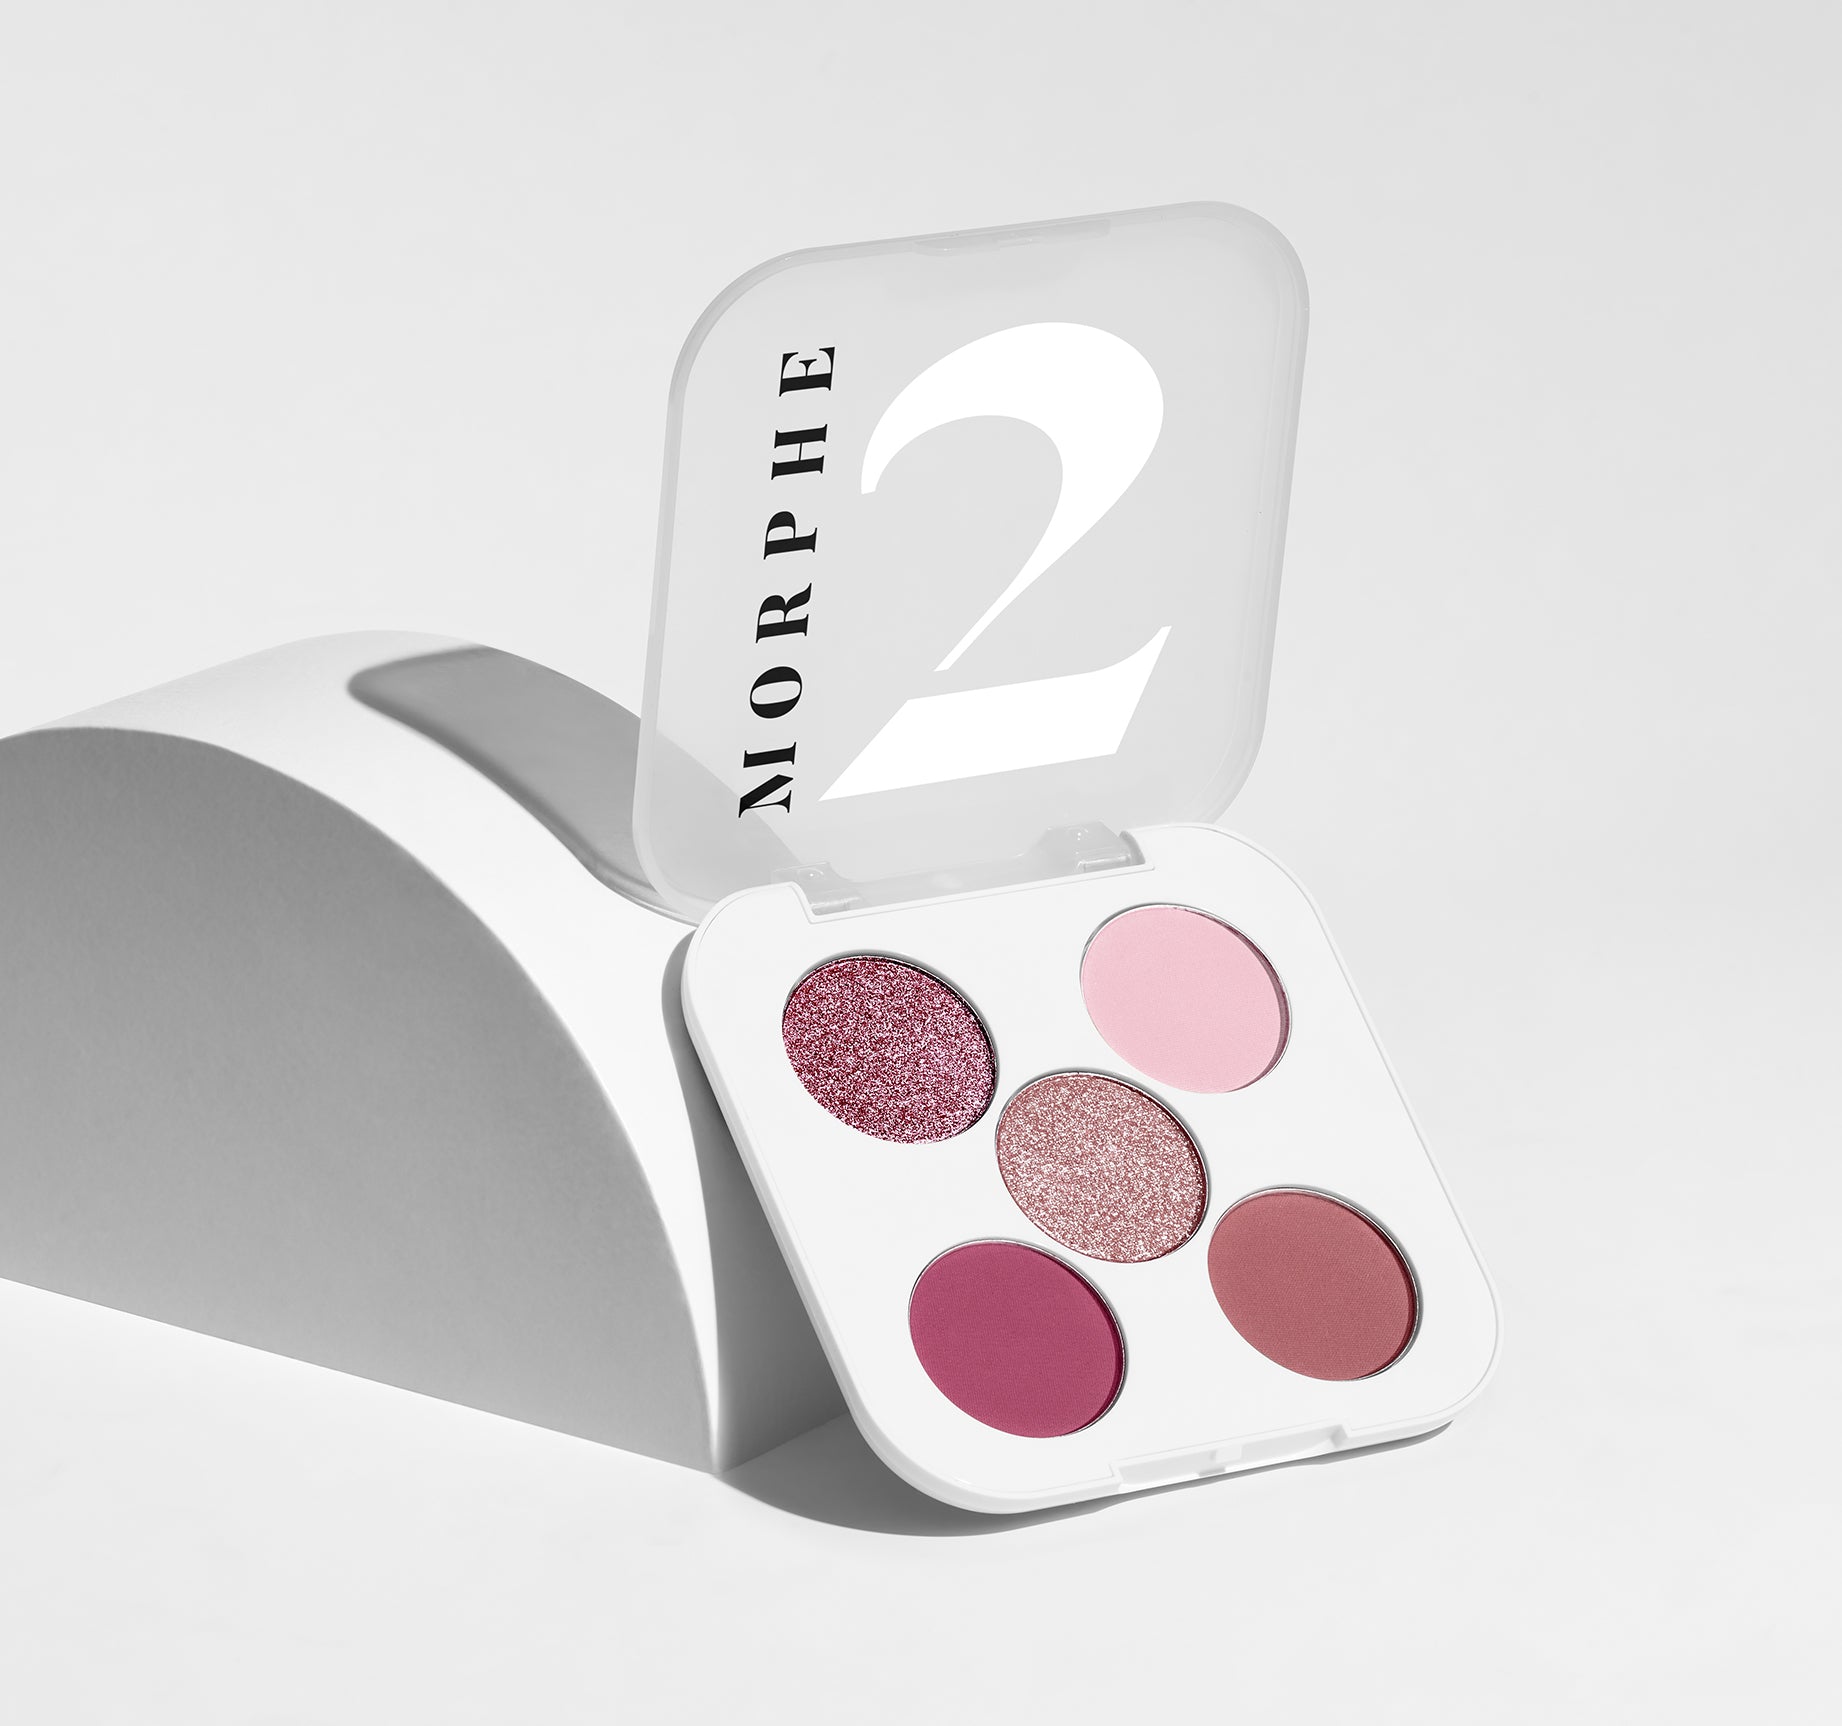 Ready In 5 Eyeshadow Palette - From Hawaii With Love - Image 9